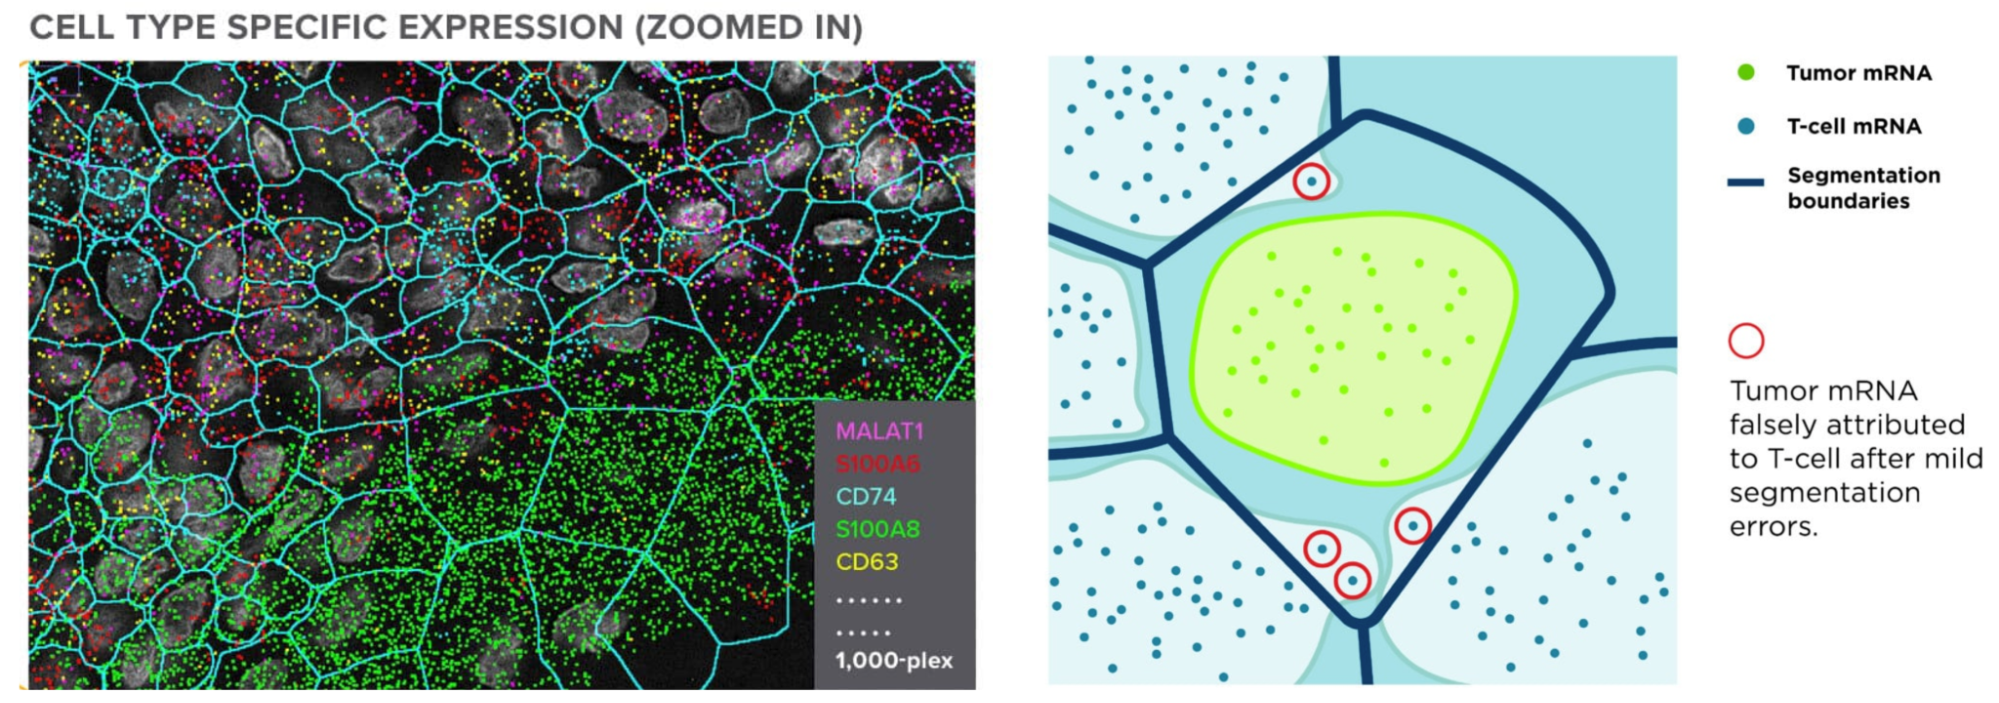 Side-by-side images showing how accurate cell segmentation enables the identification of mRNA markers in cells.